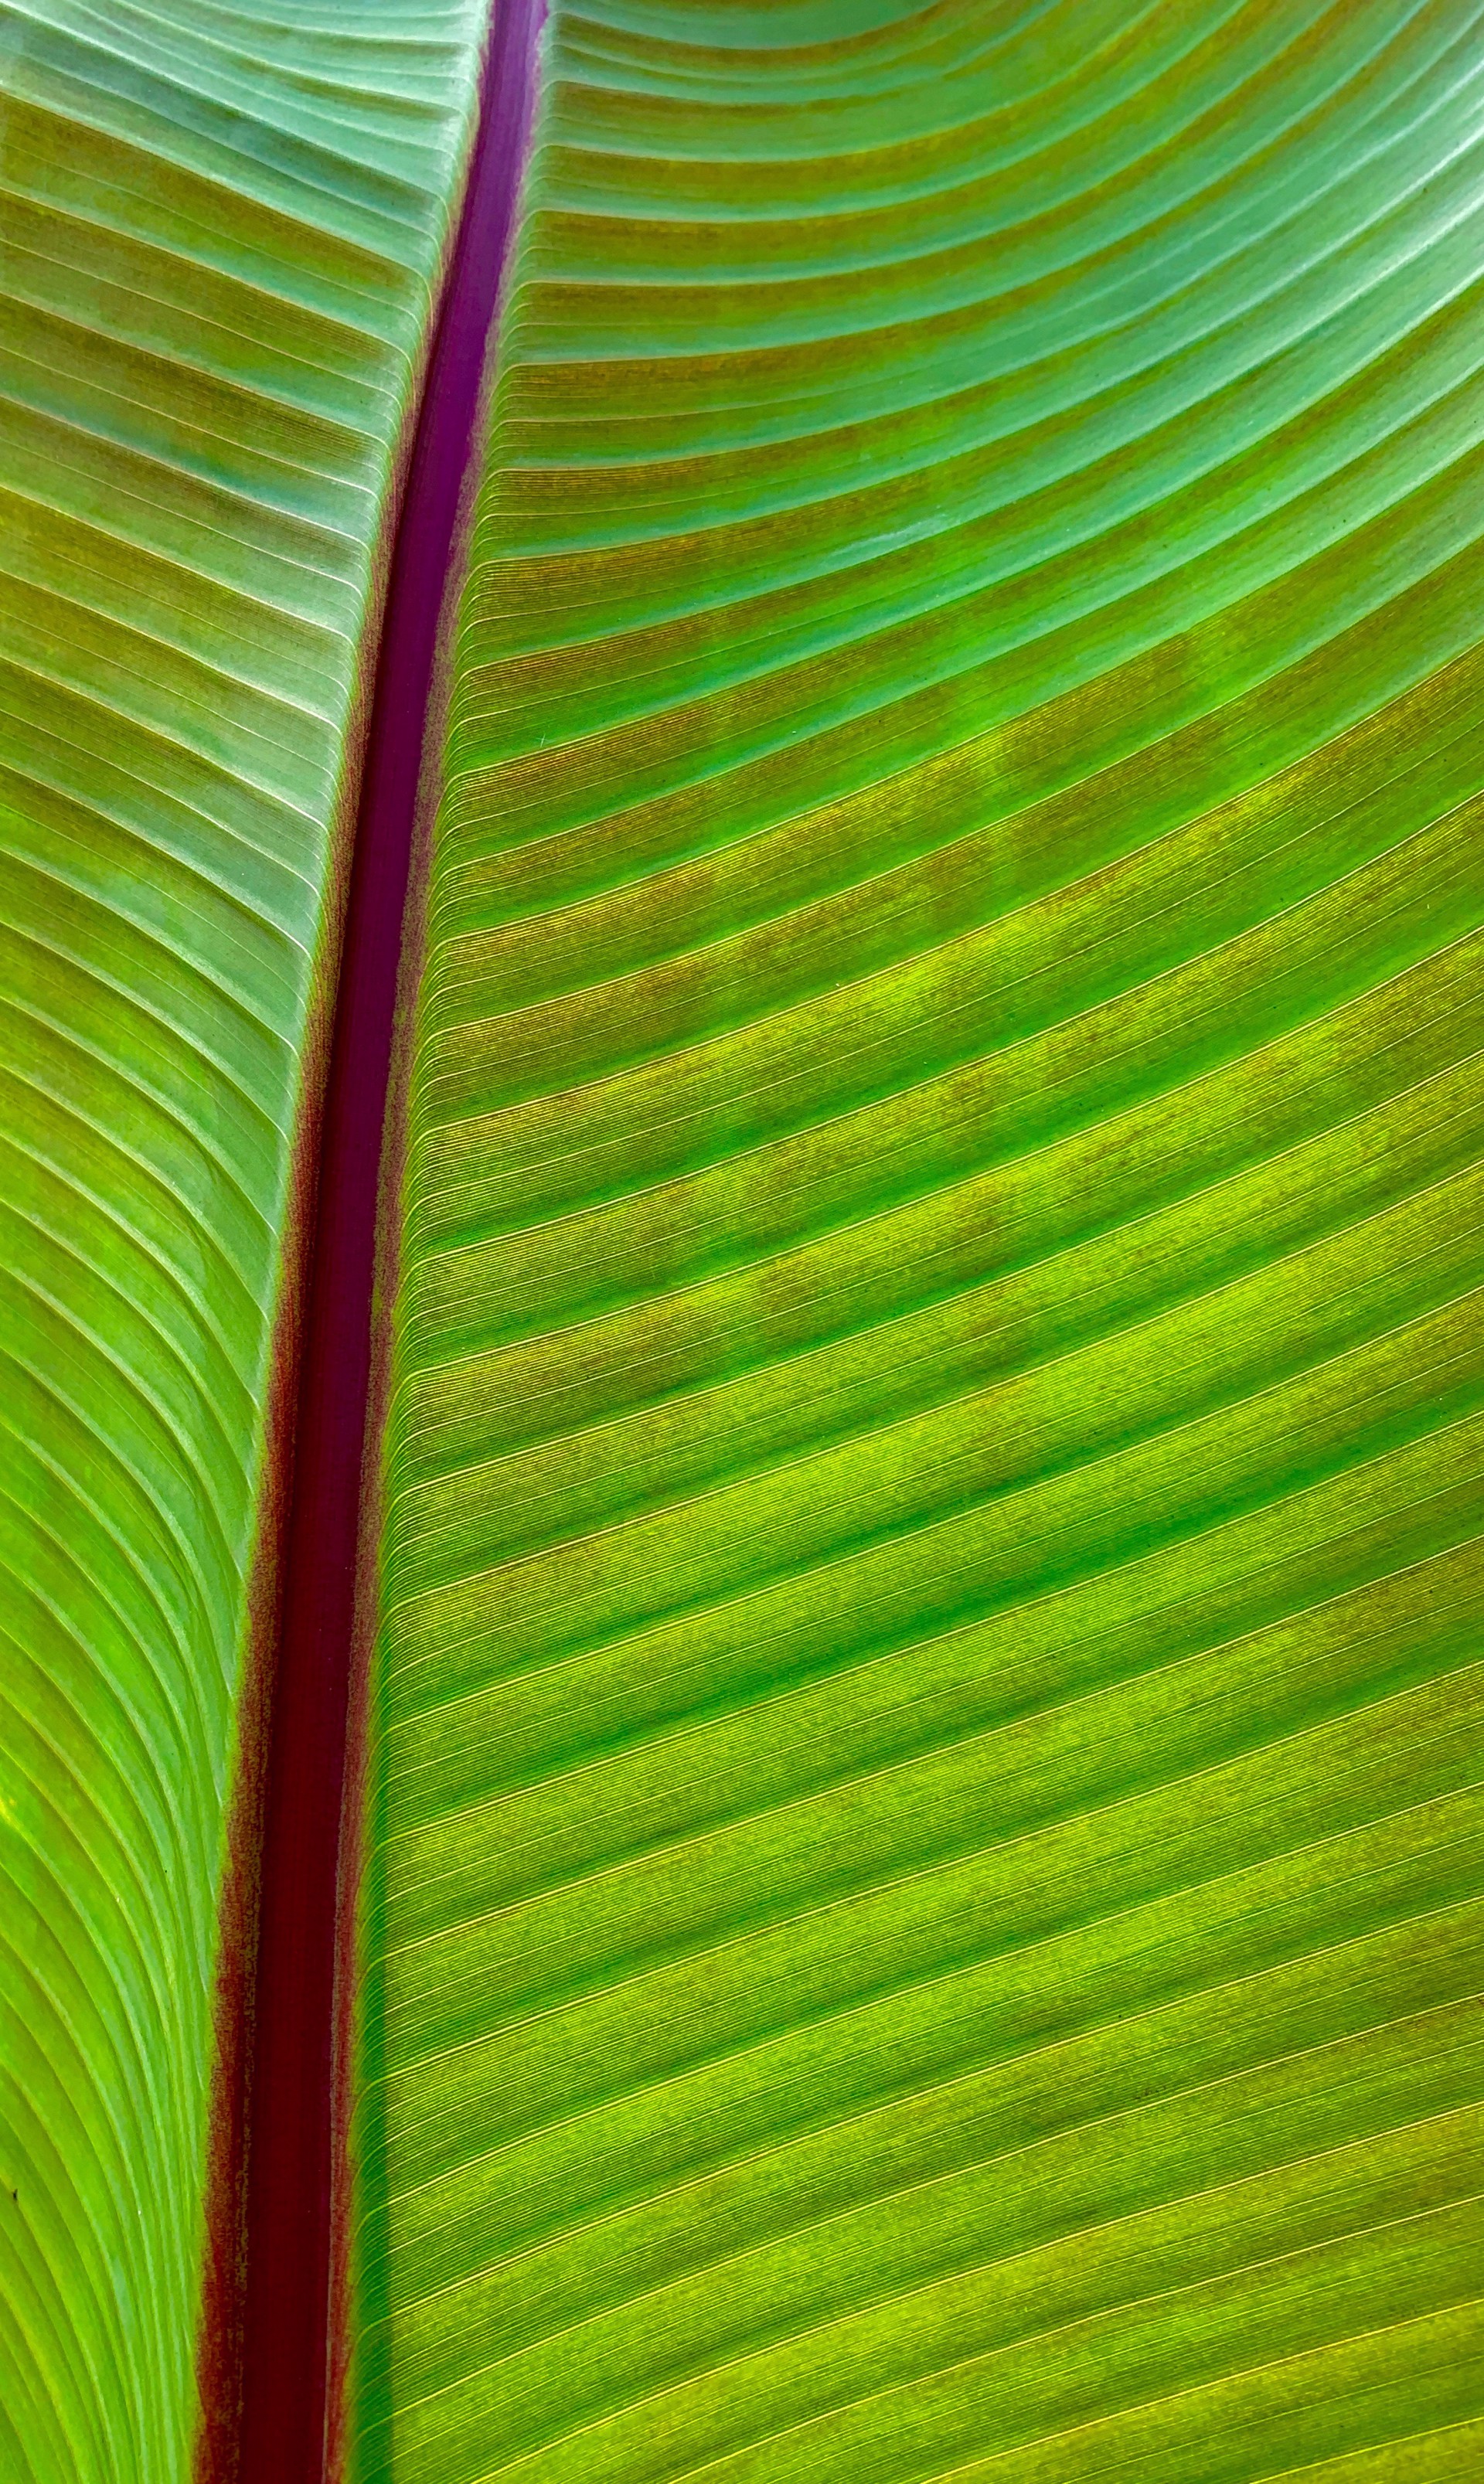 Abyssinian Banana 1 (Ensete Ventricosum) by Amy Kaslow